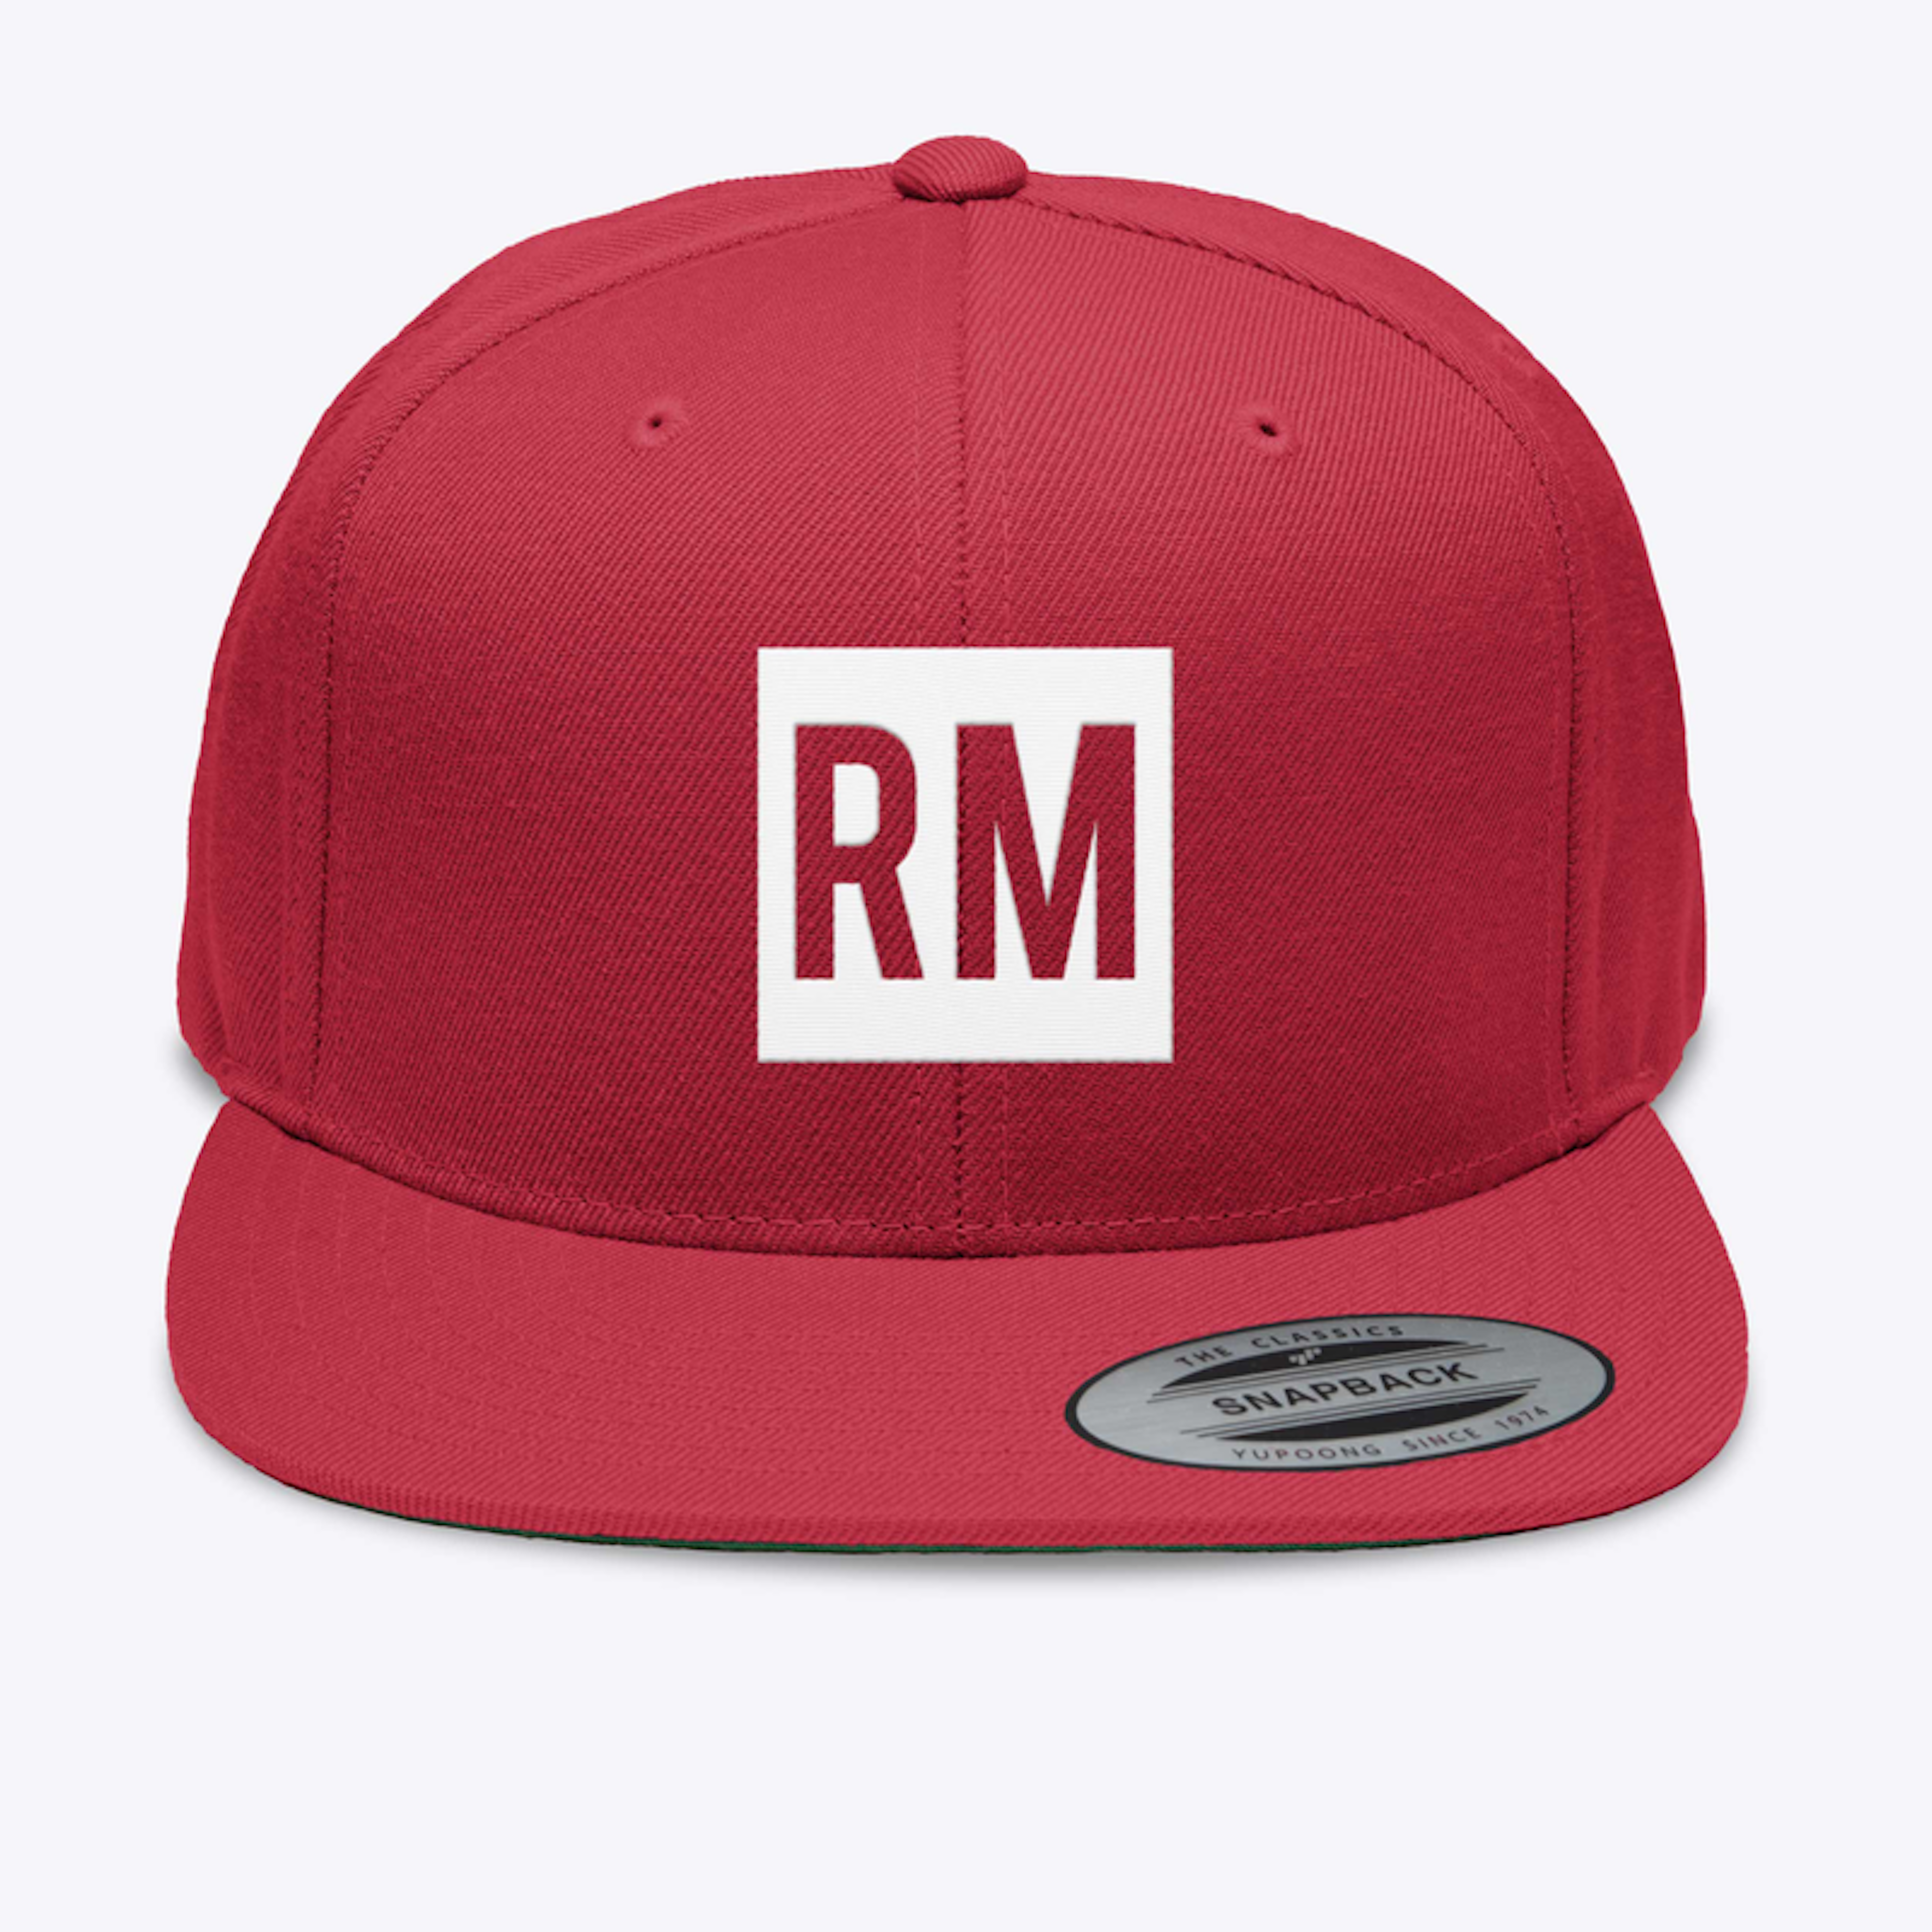 RM Dad and SnapBack Hat